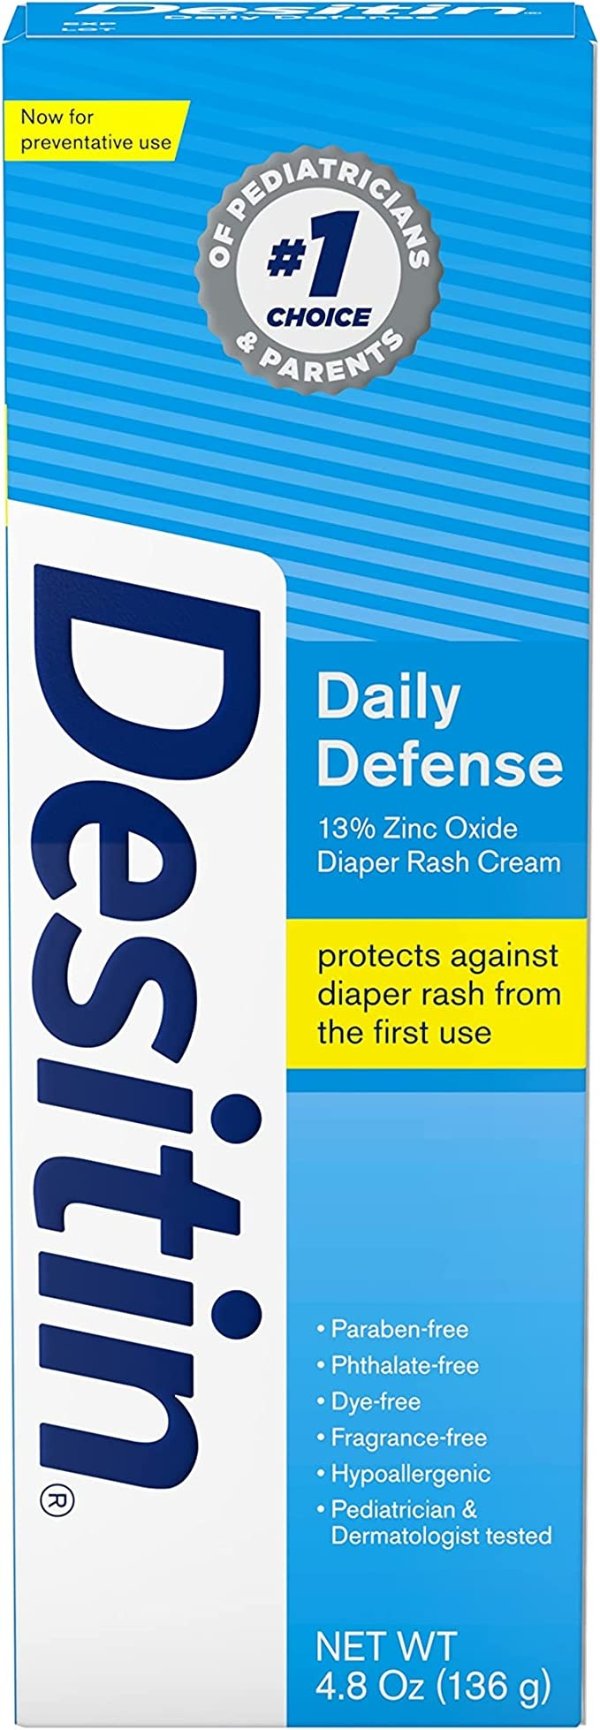 Daily Defense Baby Diaper Rash Cream with Zinc Oxide to Treat, Relieve & Prevent diaper rash, Hypoallergenic, Dye-, Phthalate- & Paraben-Free, 4.8 oz